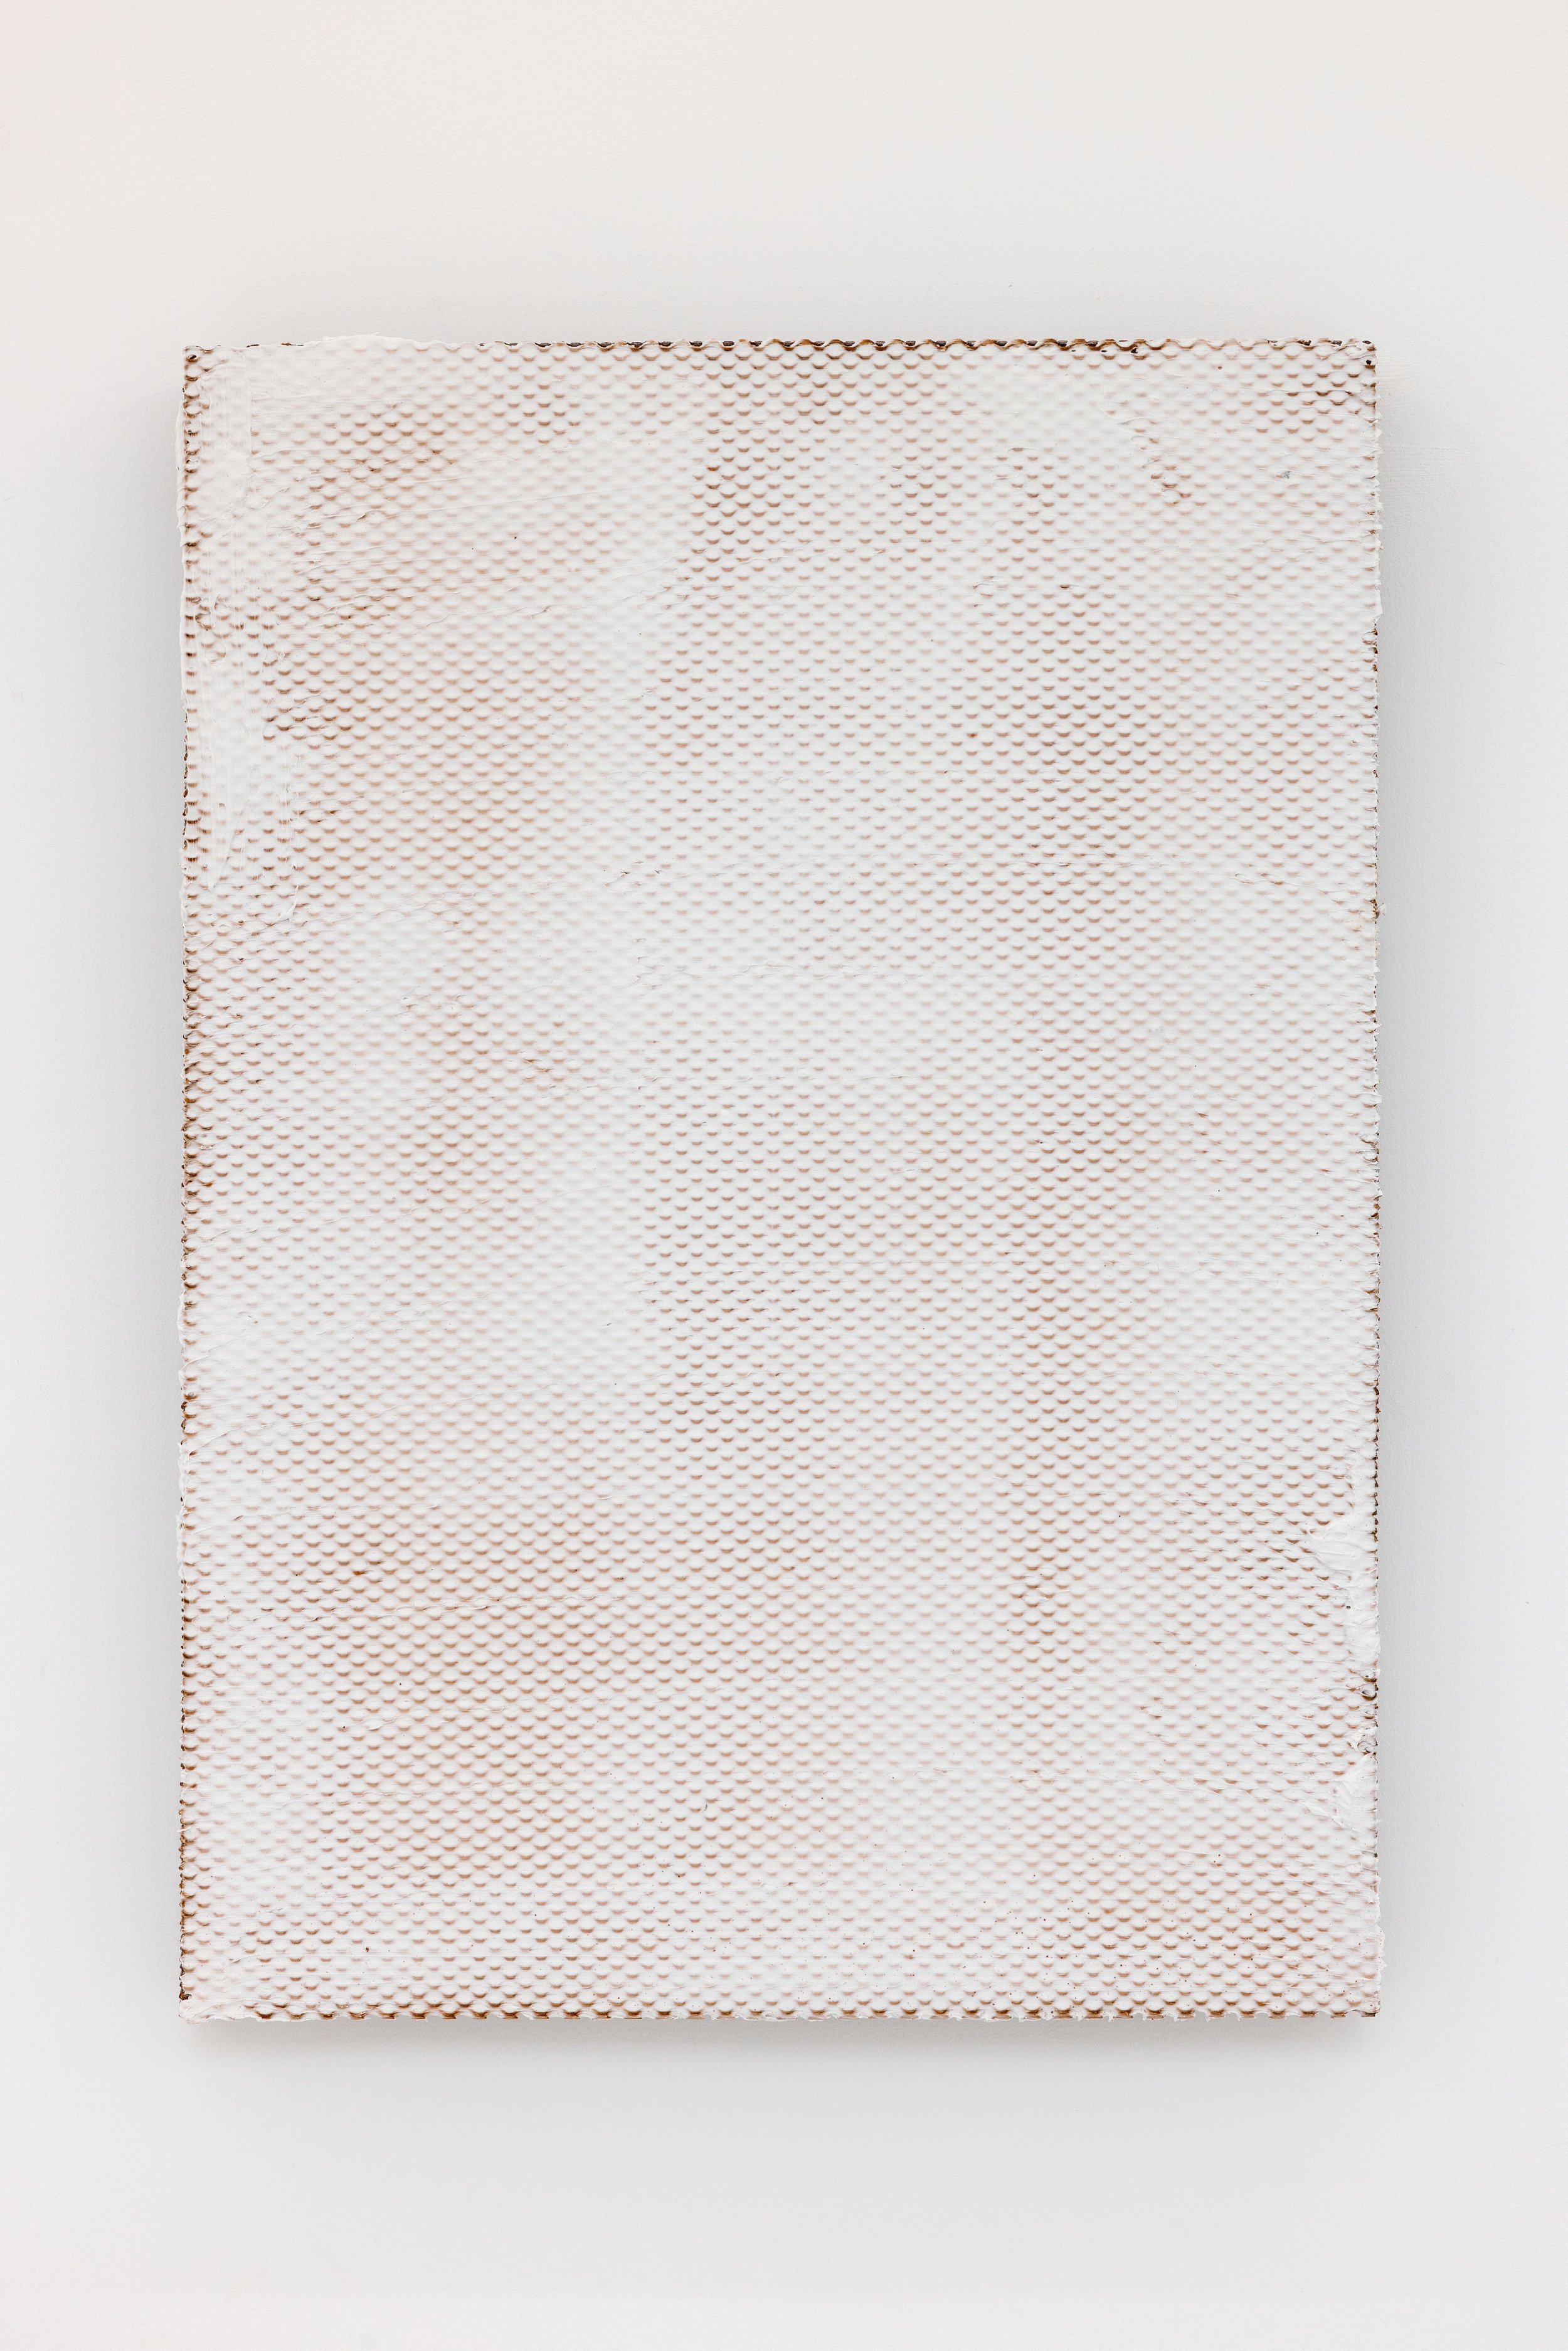  If skin could speak : about sat.01.03, 2023, acrylic on steel, 55 x 40 x 5 cm 